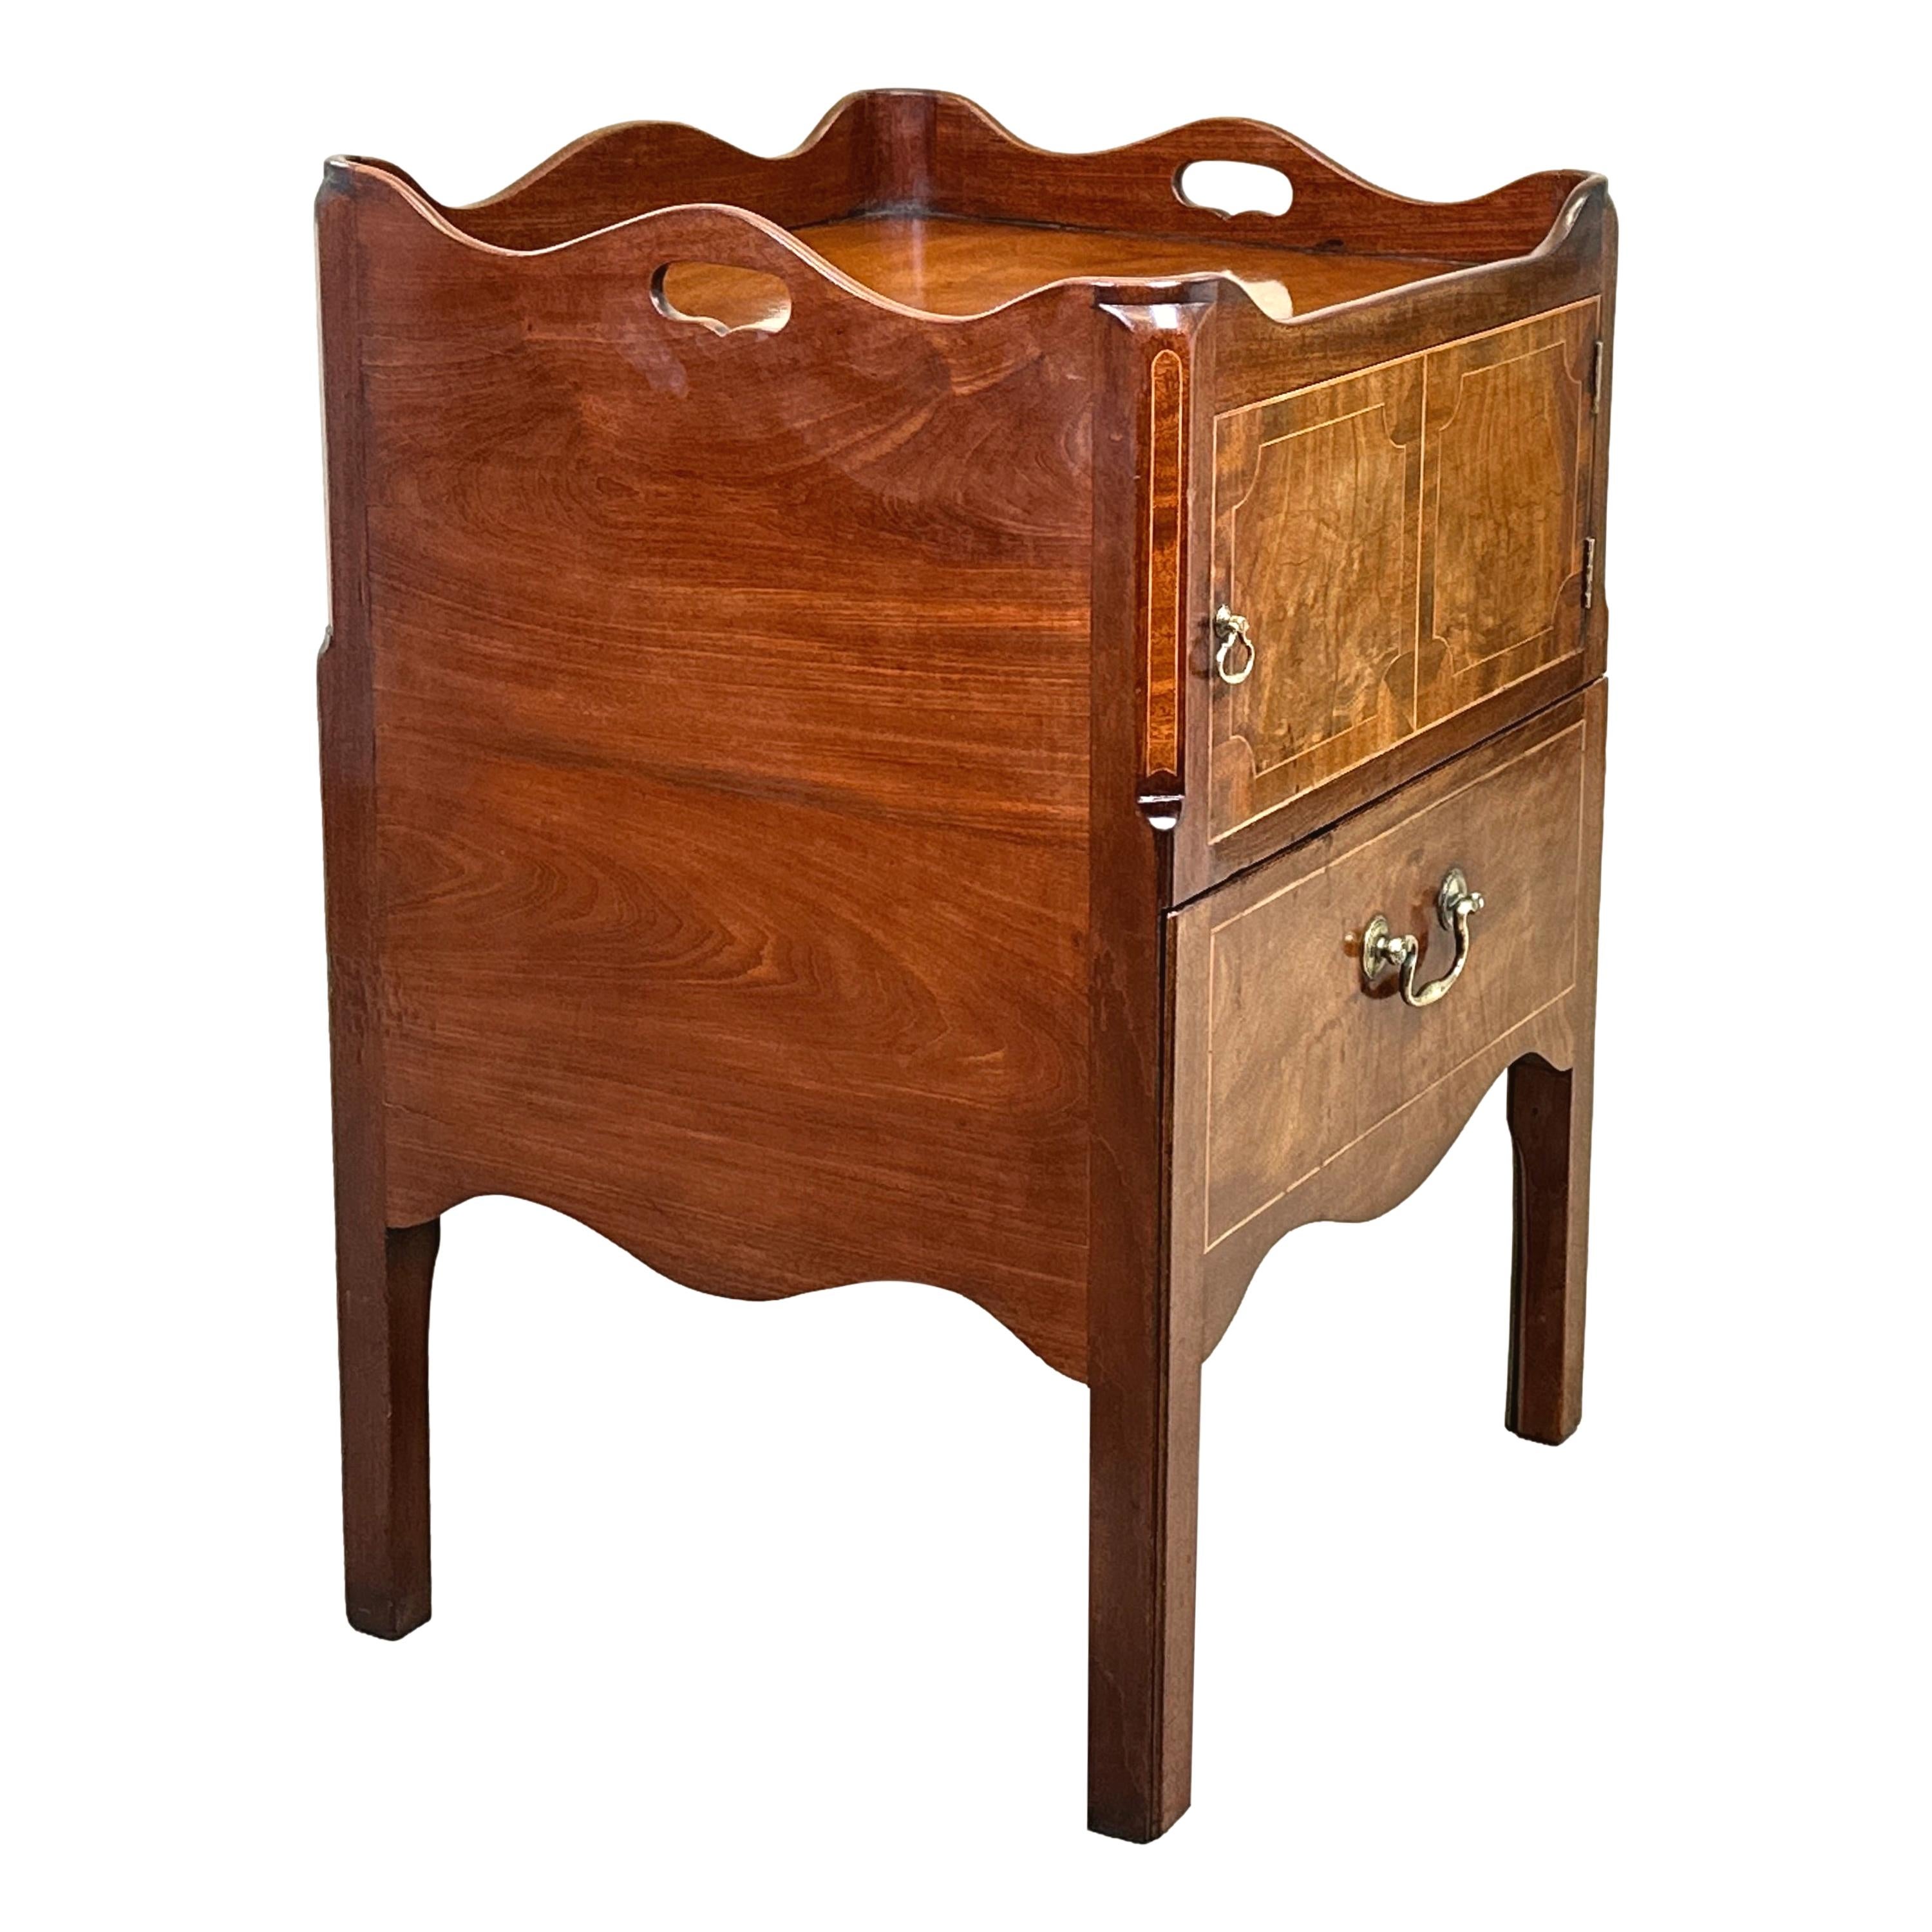 A Superb Quality Late 18th Century, George III Period, Mahogany Bedside Night Table, Or Tray Top Commode, Having Elegant Shaped Tray Top With Pierced Handles, Over One Double Panelled Door Flanked By Banded, Canted Corners And One Converted Pull Out